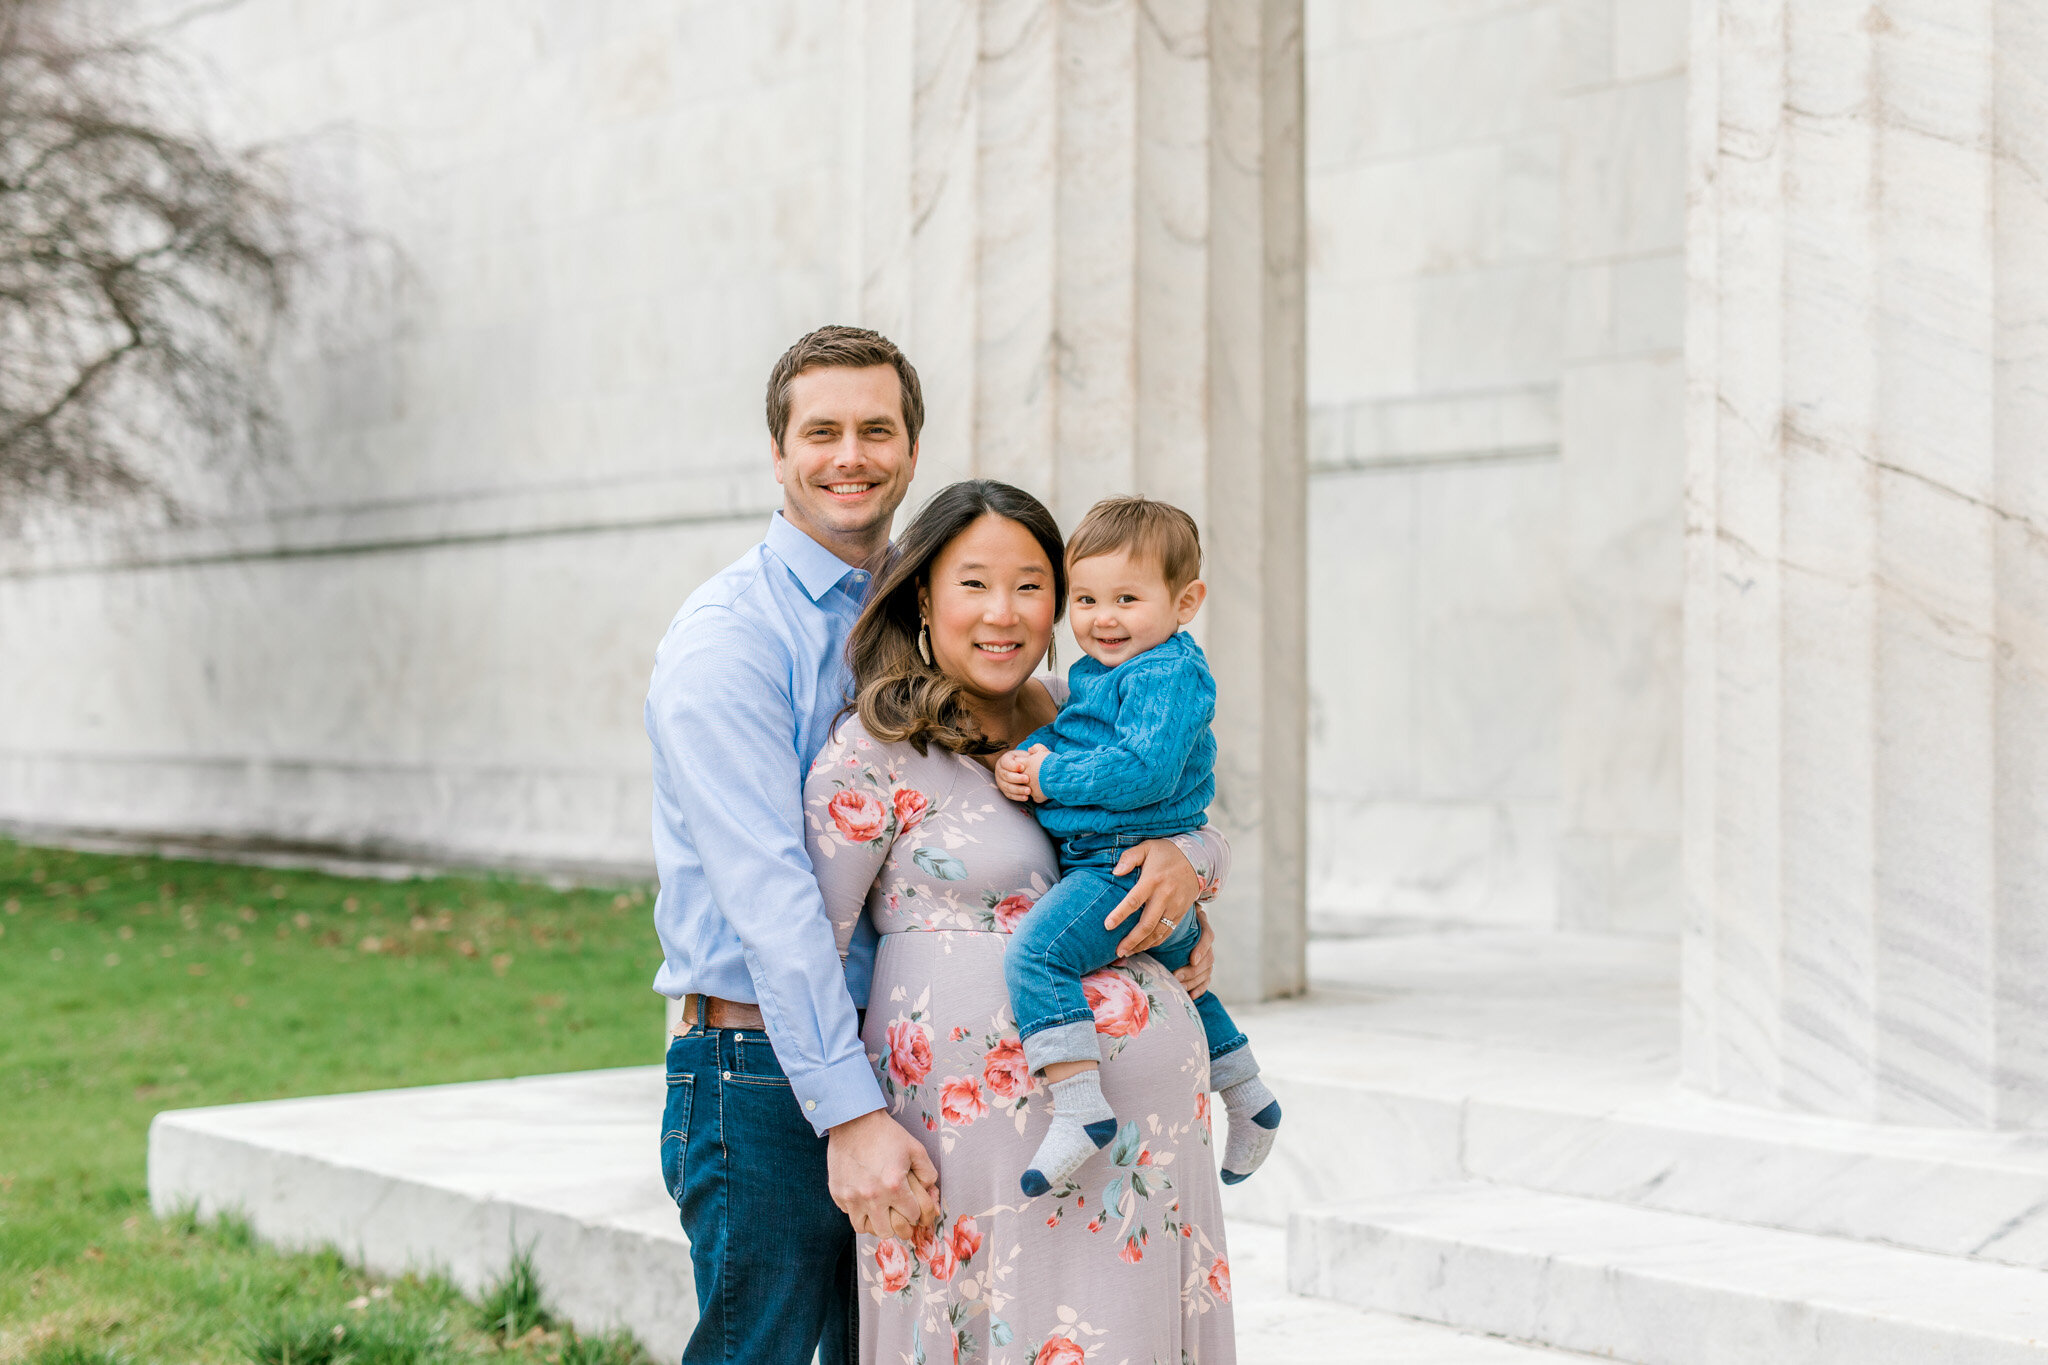 Spring Maternity Session | Light &amp; Airy Maternity Session Outdoor | Marble Pillars | West Michigan Maternity Photographer